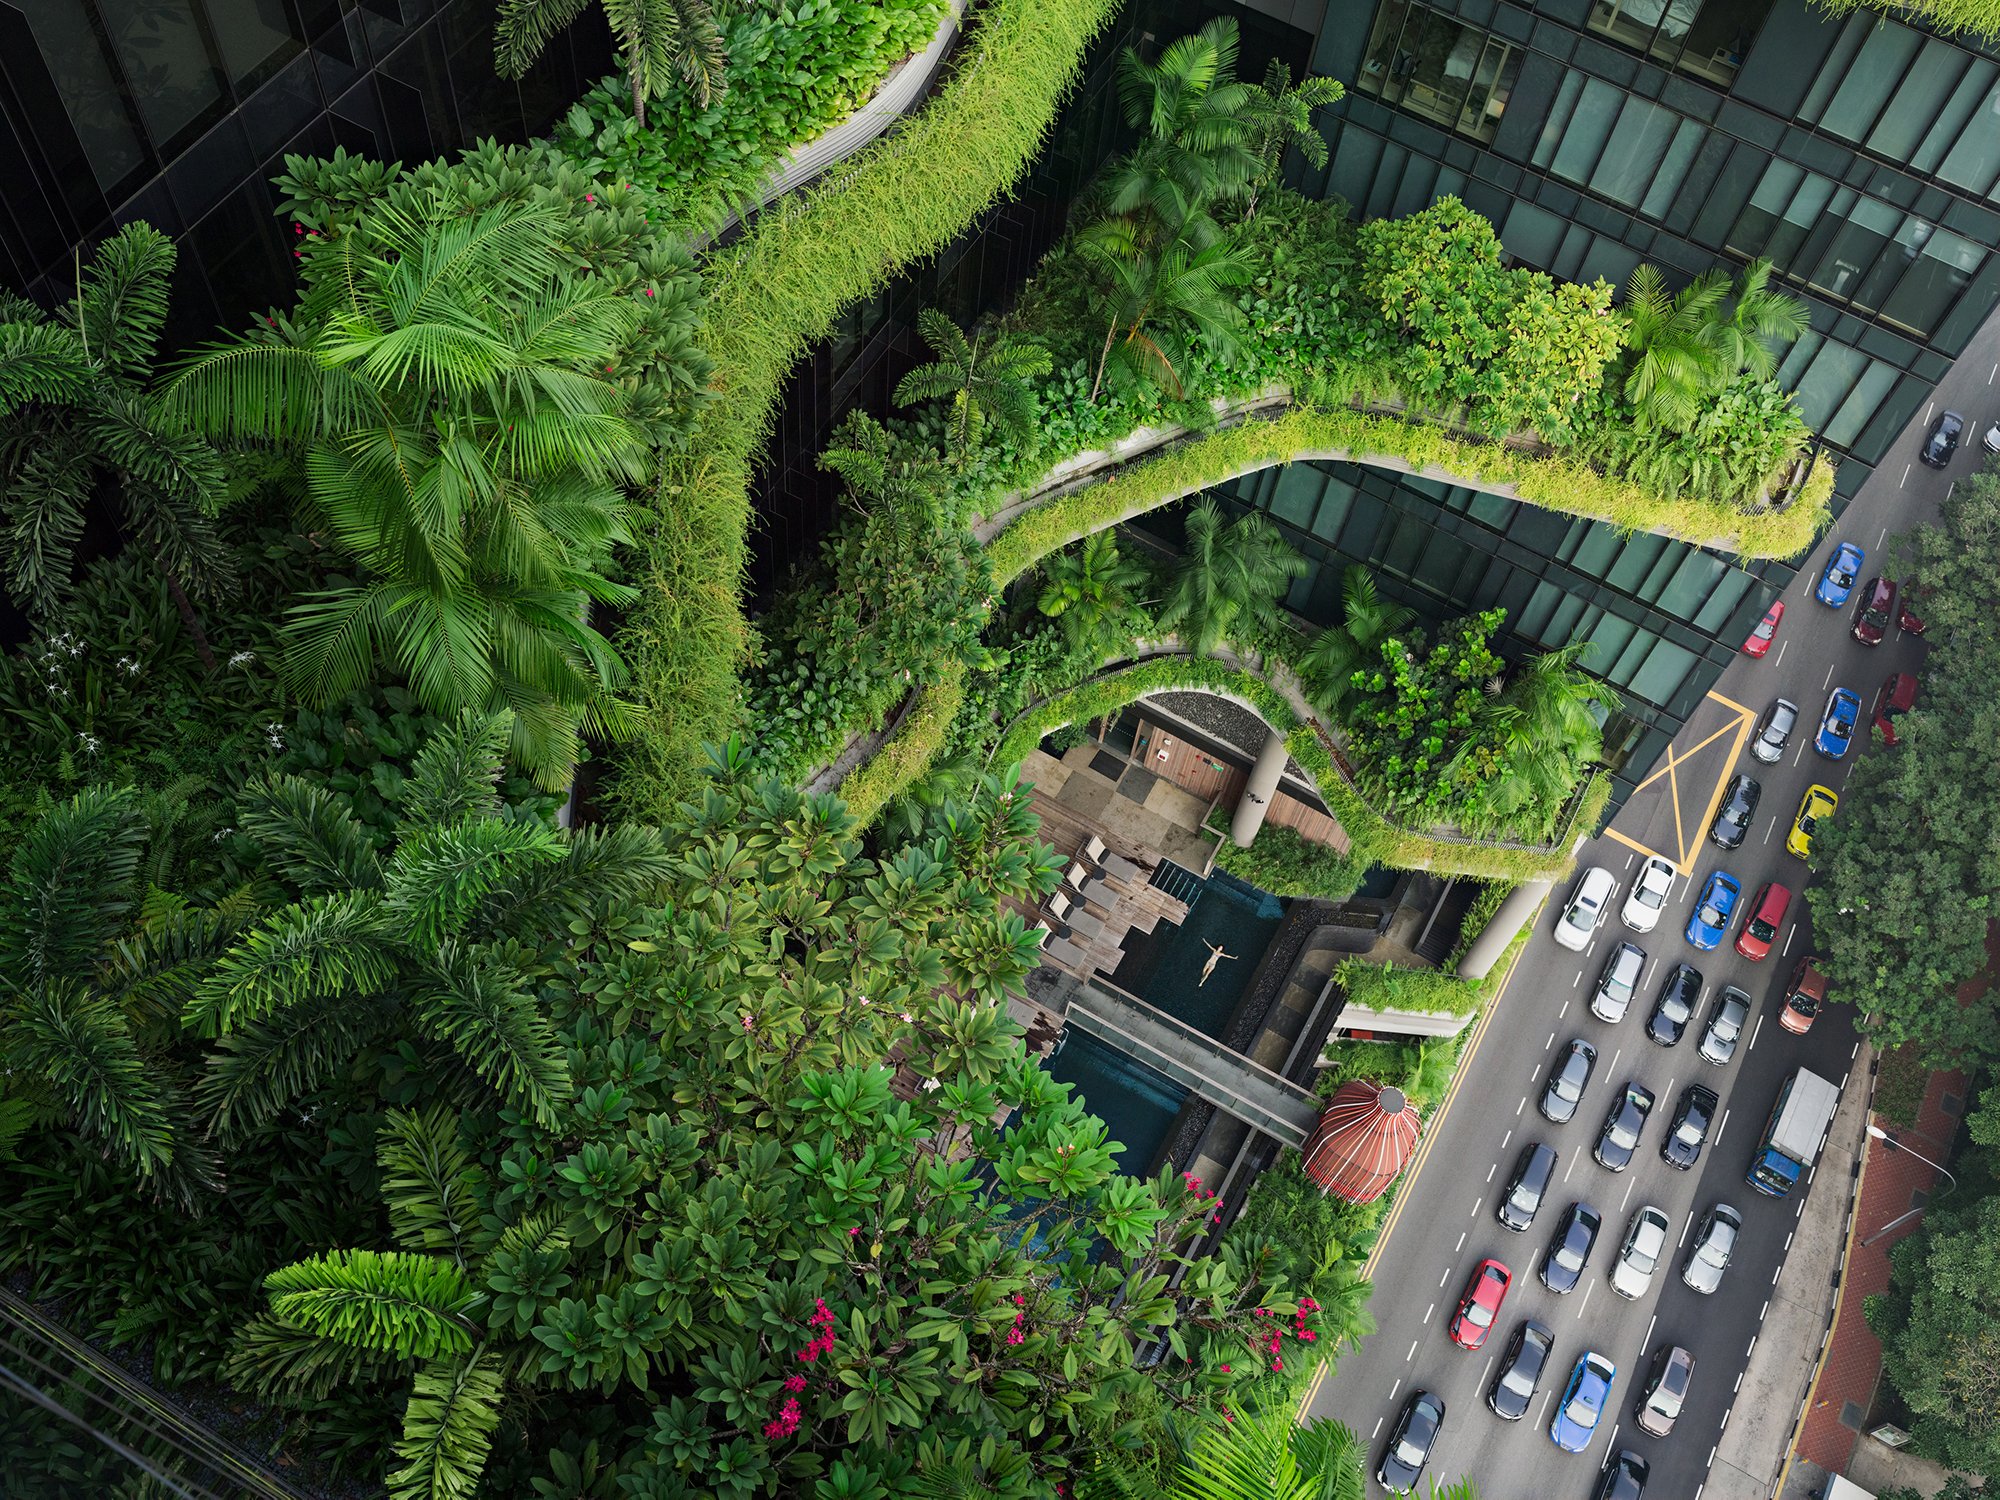 A square shaft of space surrounded on three sides by floor to ceiling windows and curving terraces bursting with tropical plants. At the bottom there is a person floating in a swimming pool that is one story above a five-lane street full of modern cars.